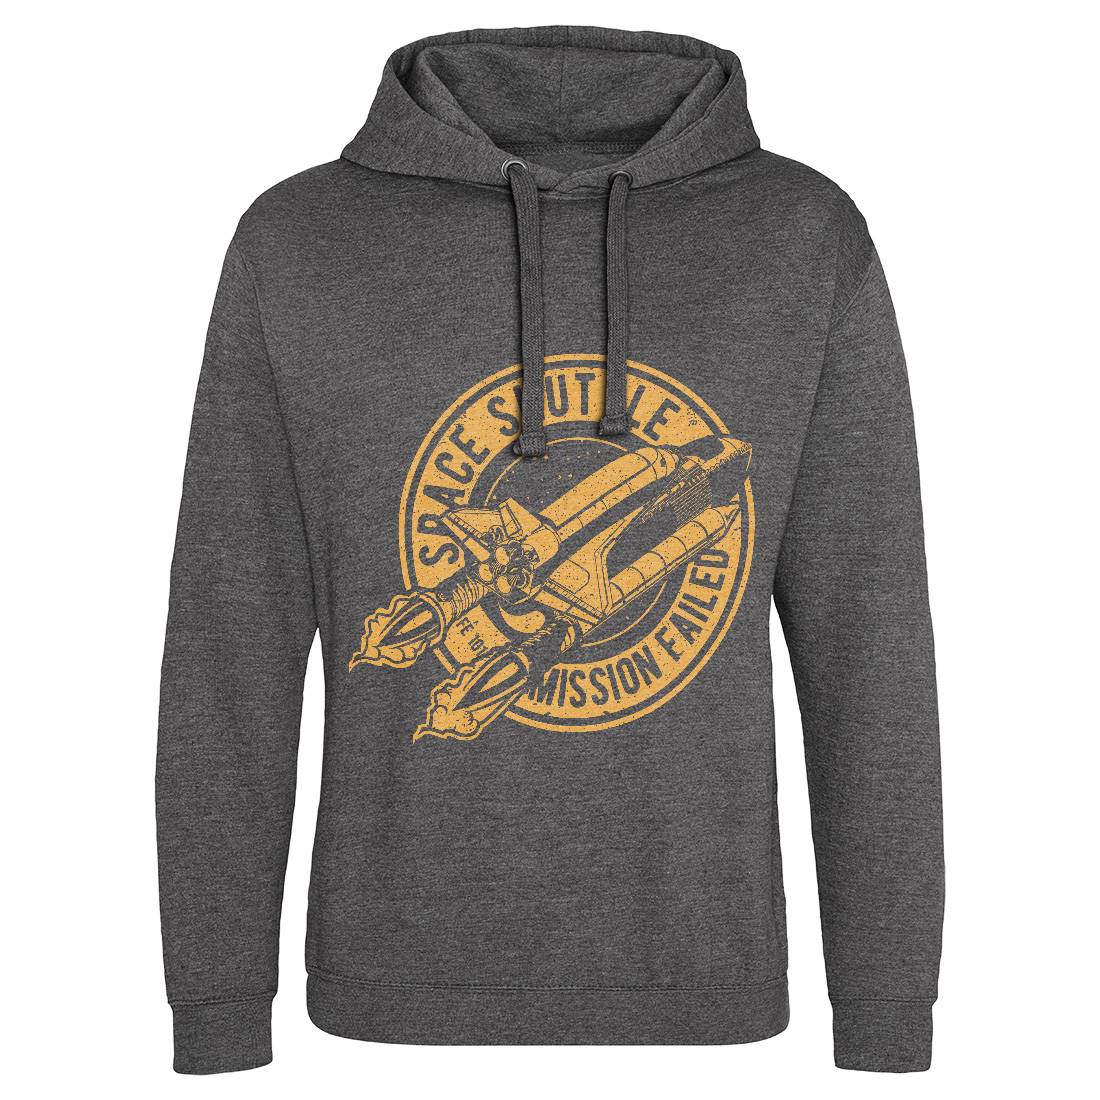 Mission Failed Mens Hoodie Without Pocket Space A713